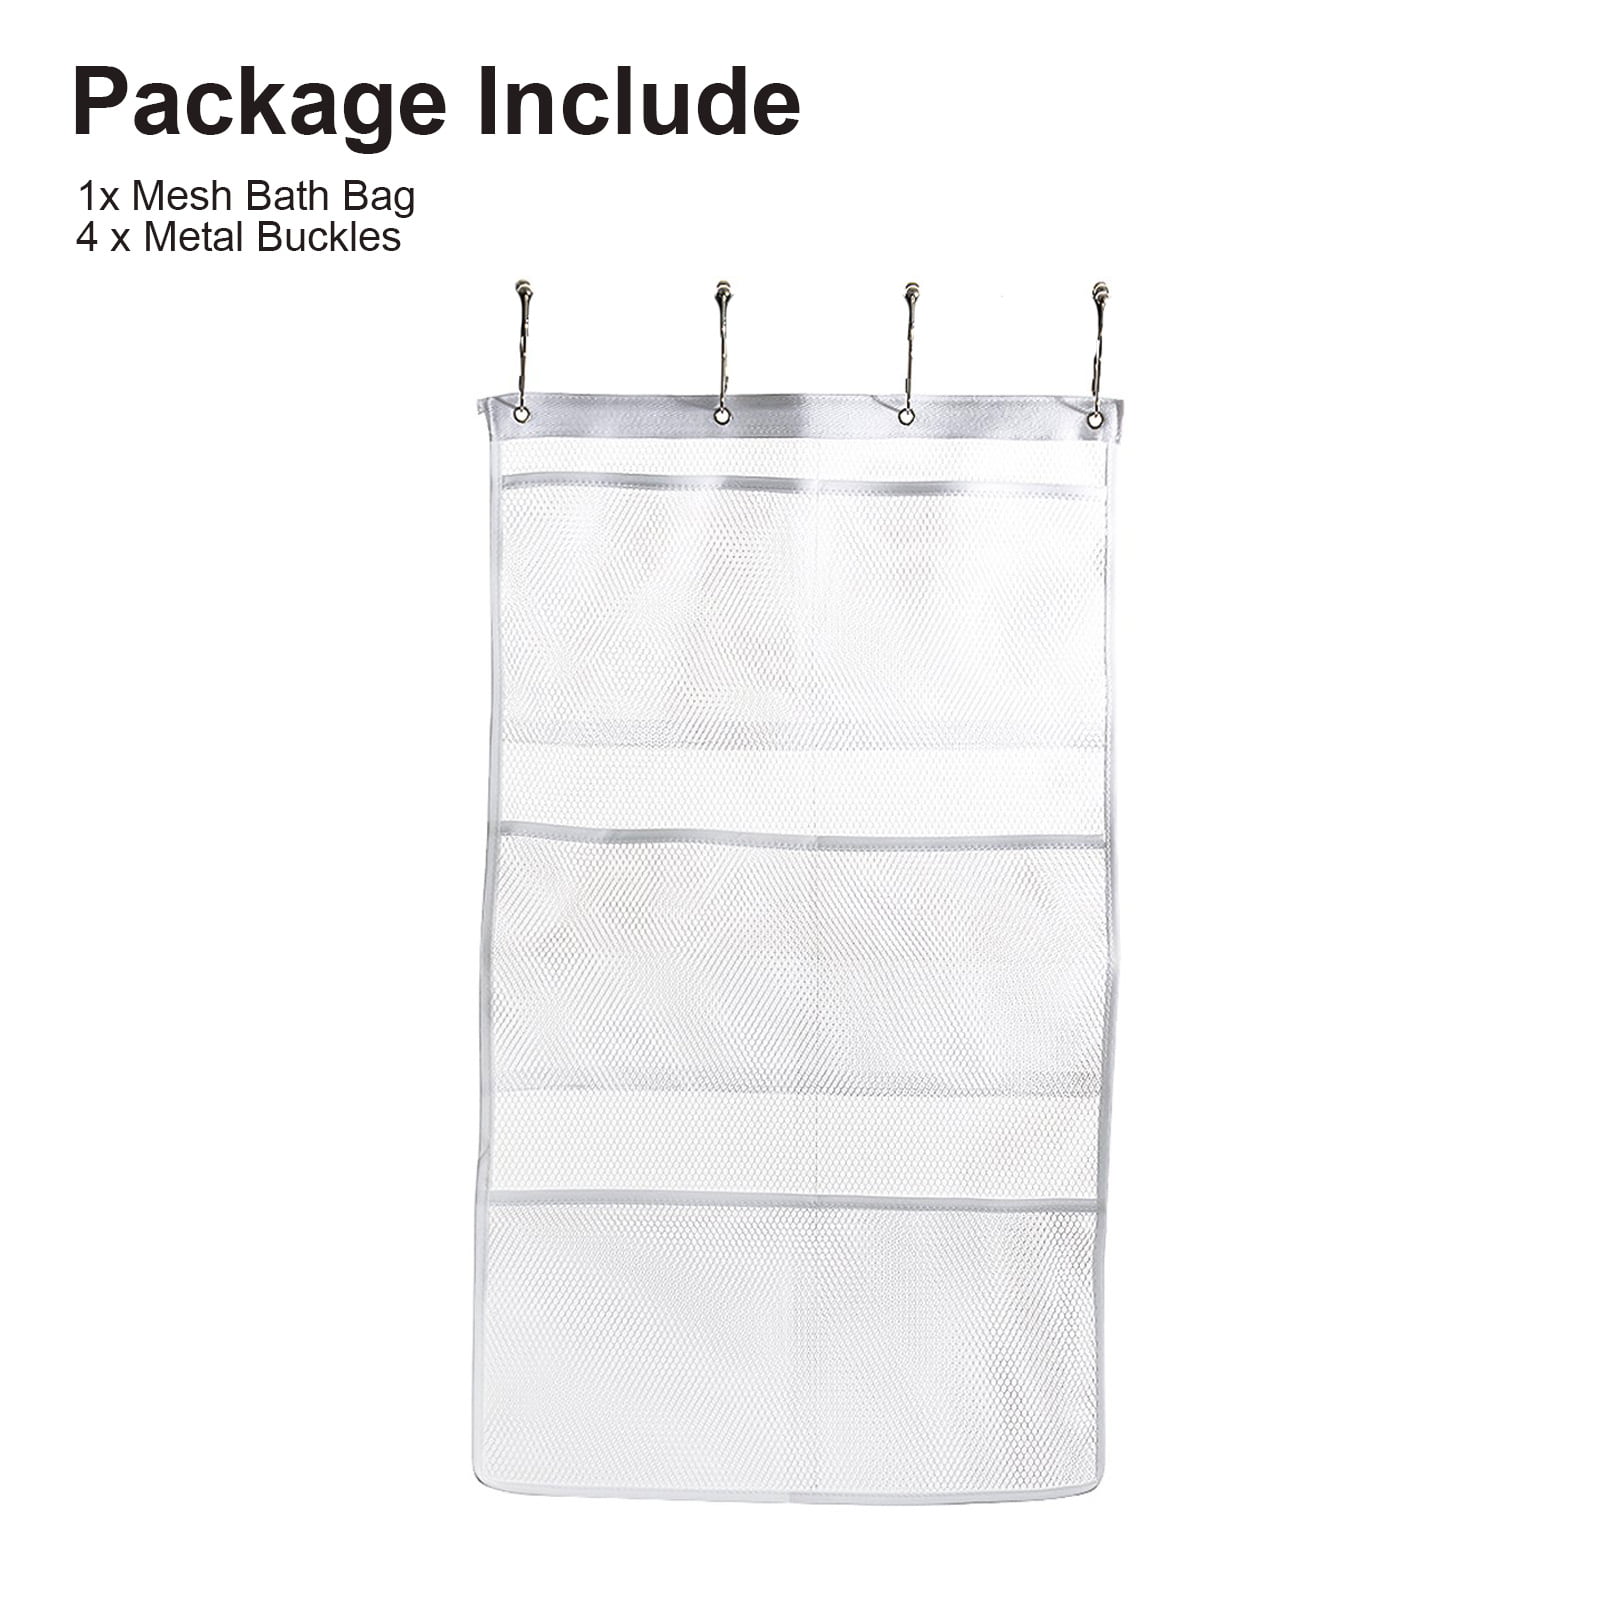 Yihoon Mesh Shower Caddy Curtains Organizer Hanging Bathroom Shower Curtain Rod/Liner Hooks Accessories with 6 Pockets Save Space in Small Bathroom Tub 4 Rings 